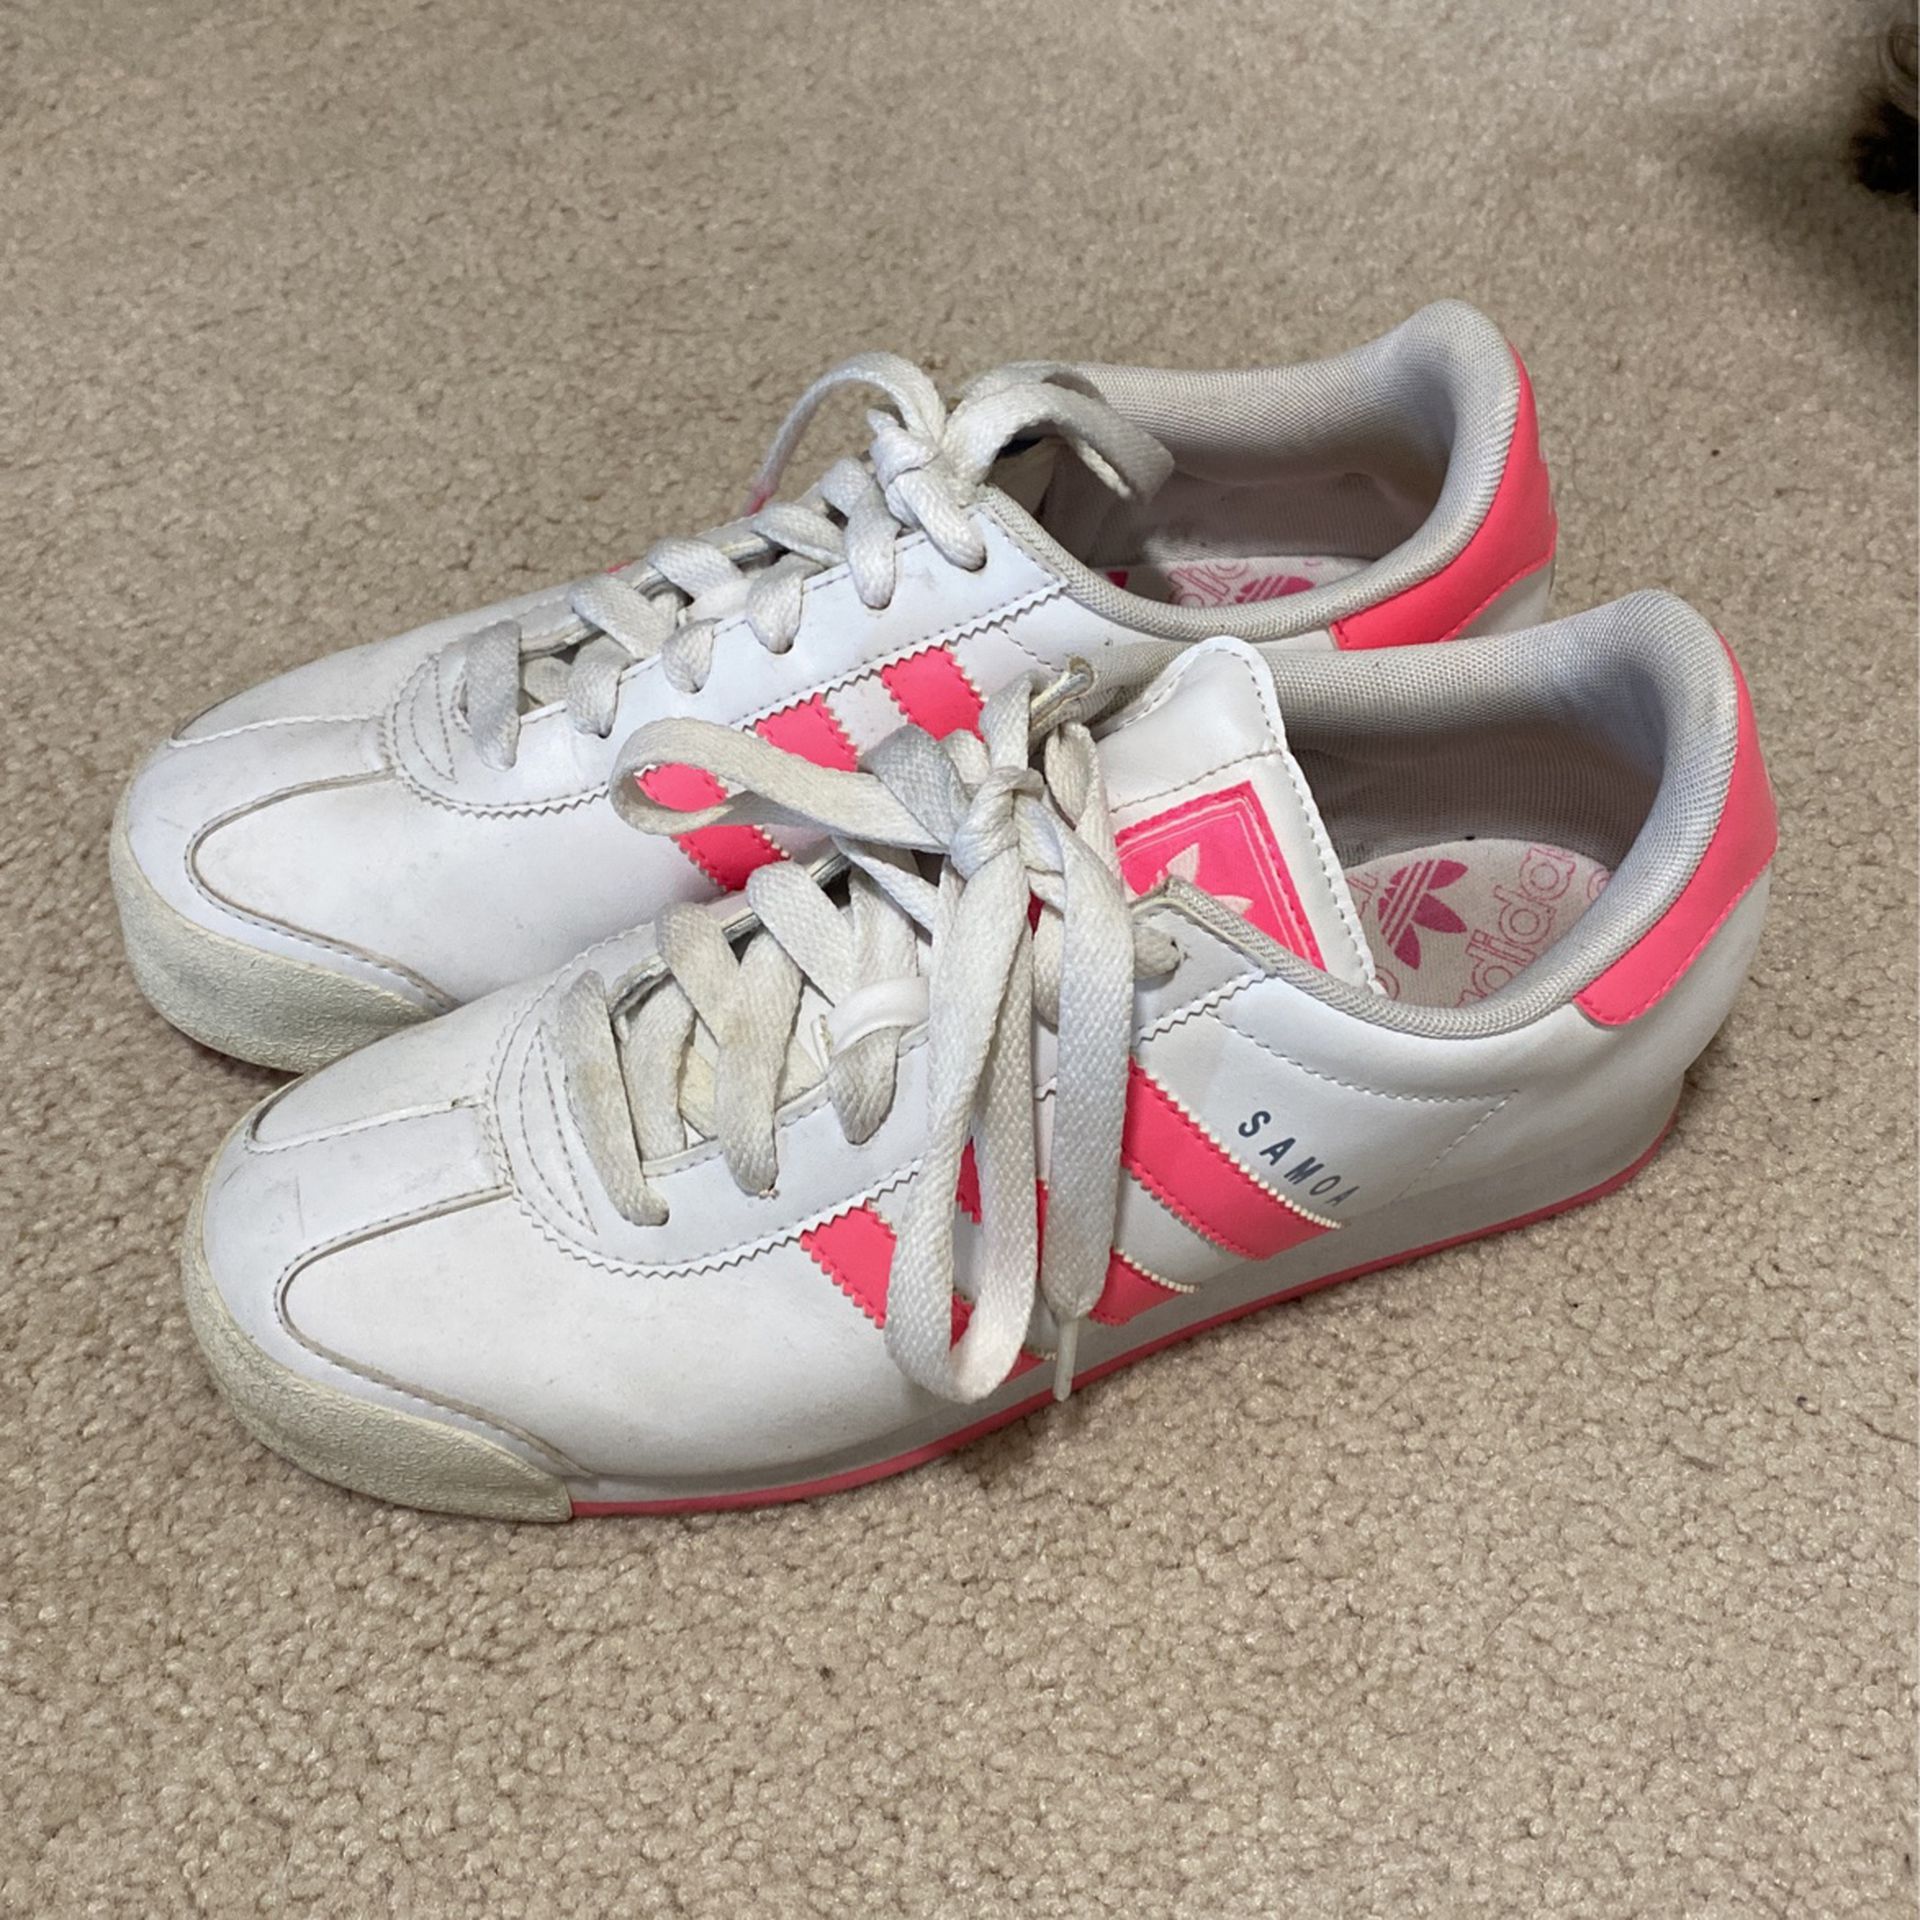 Adidas Samoa Women's 8.5 for in Way, - OfferUp